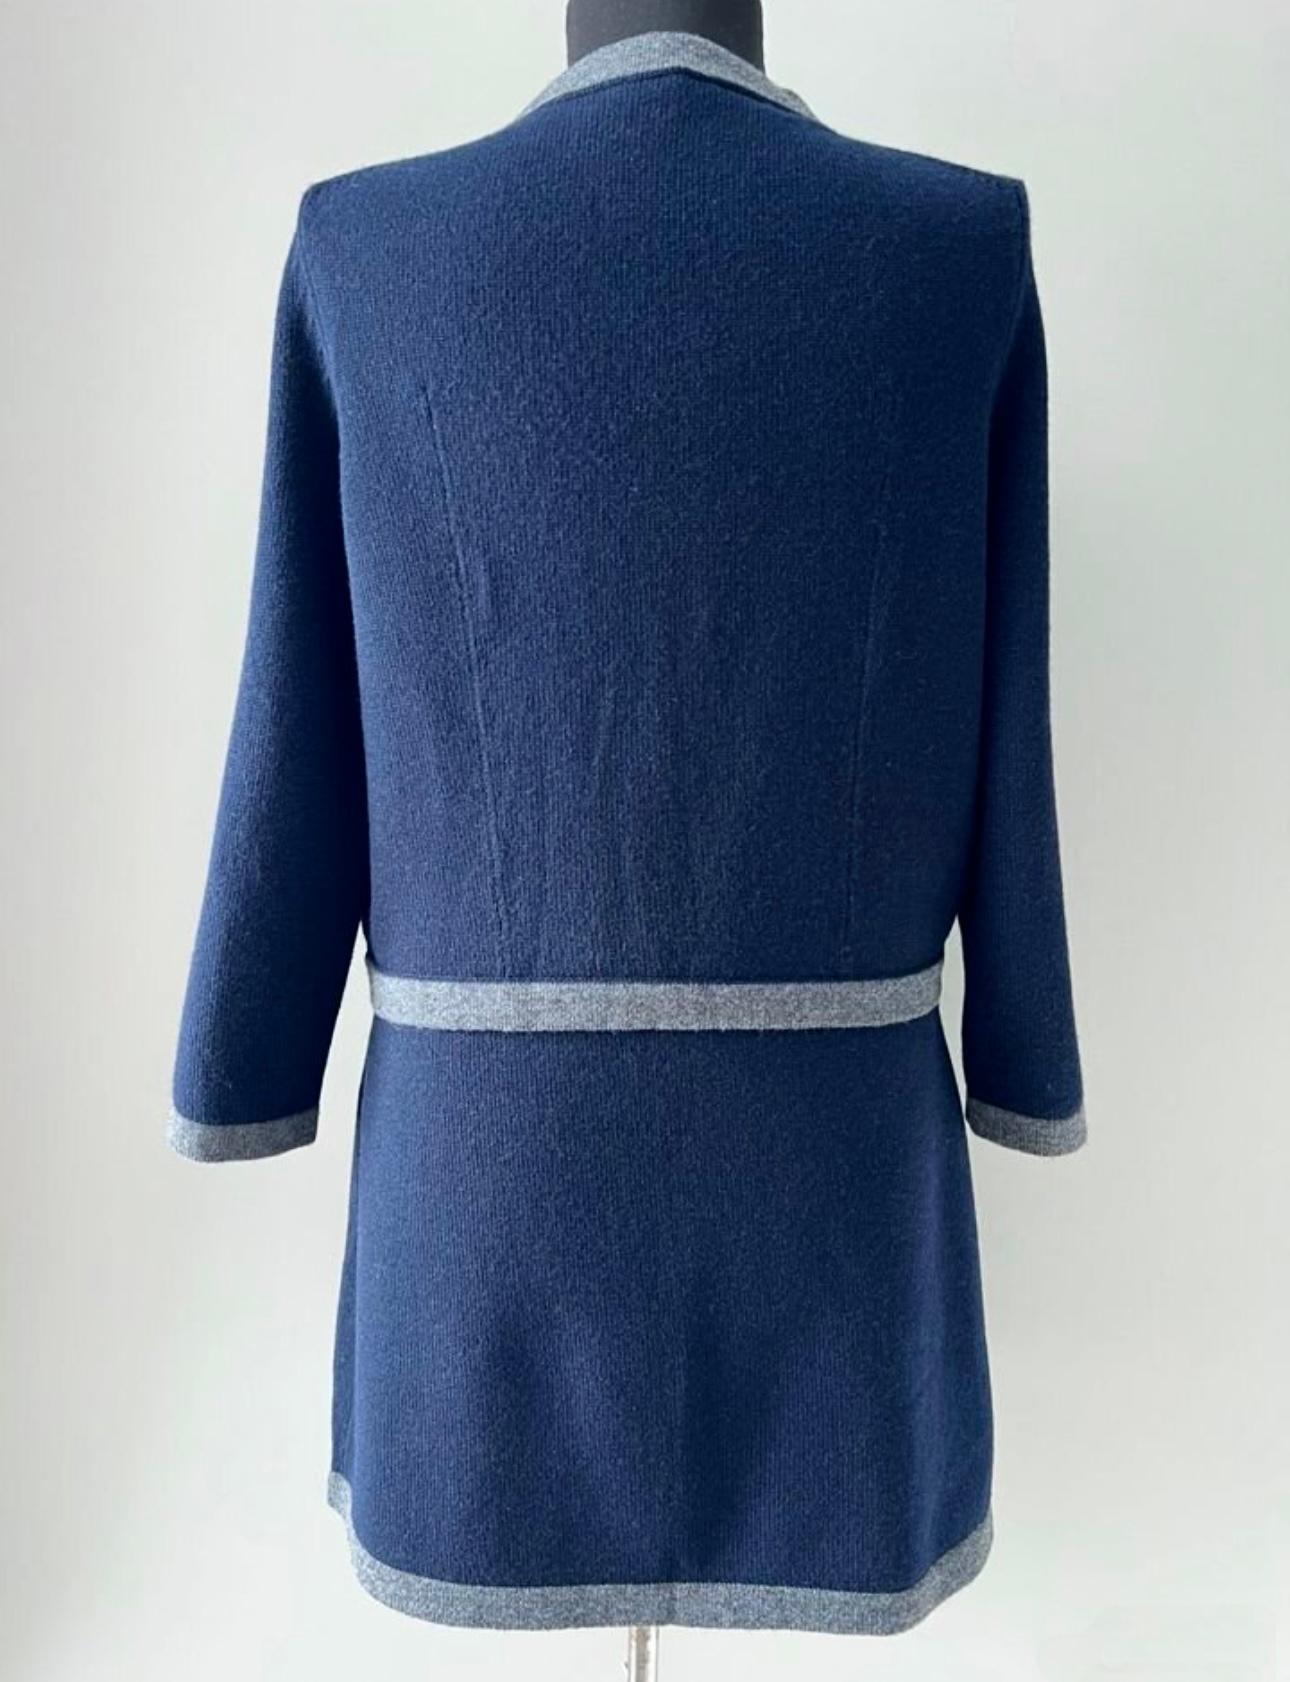 Chanel Sophia Coppola Style New Cashmere Suit For Sale 4